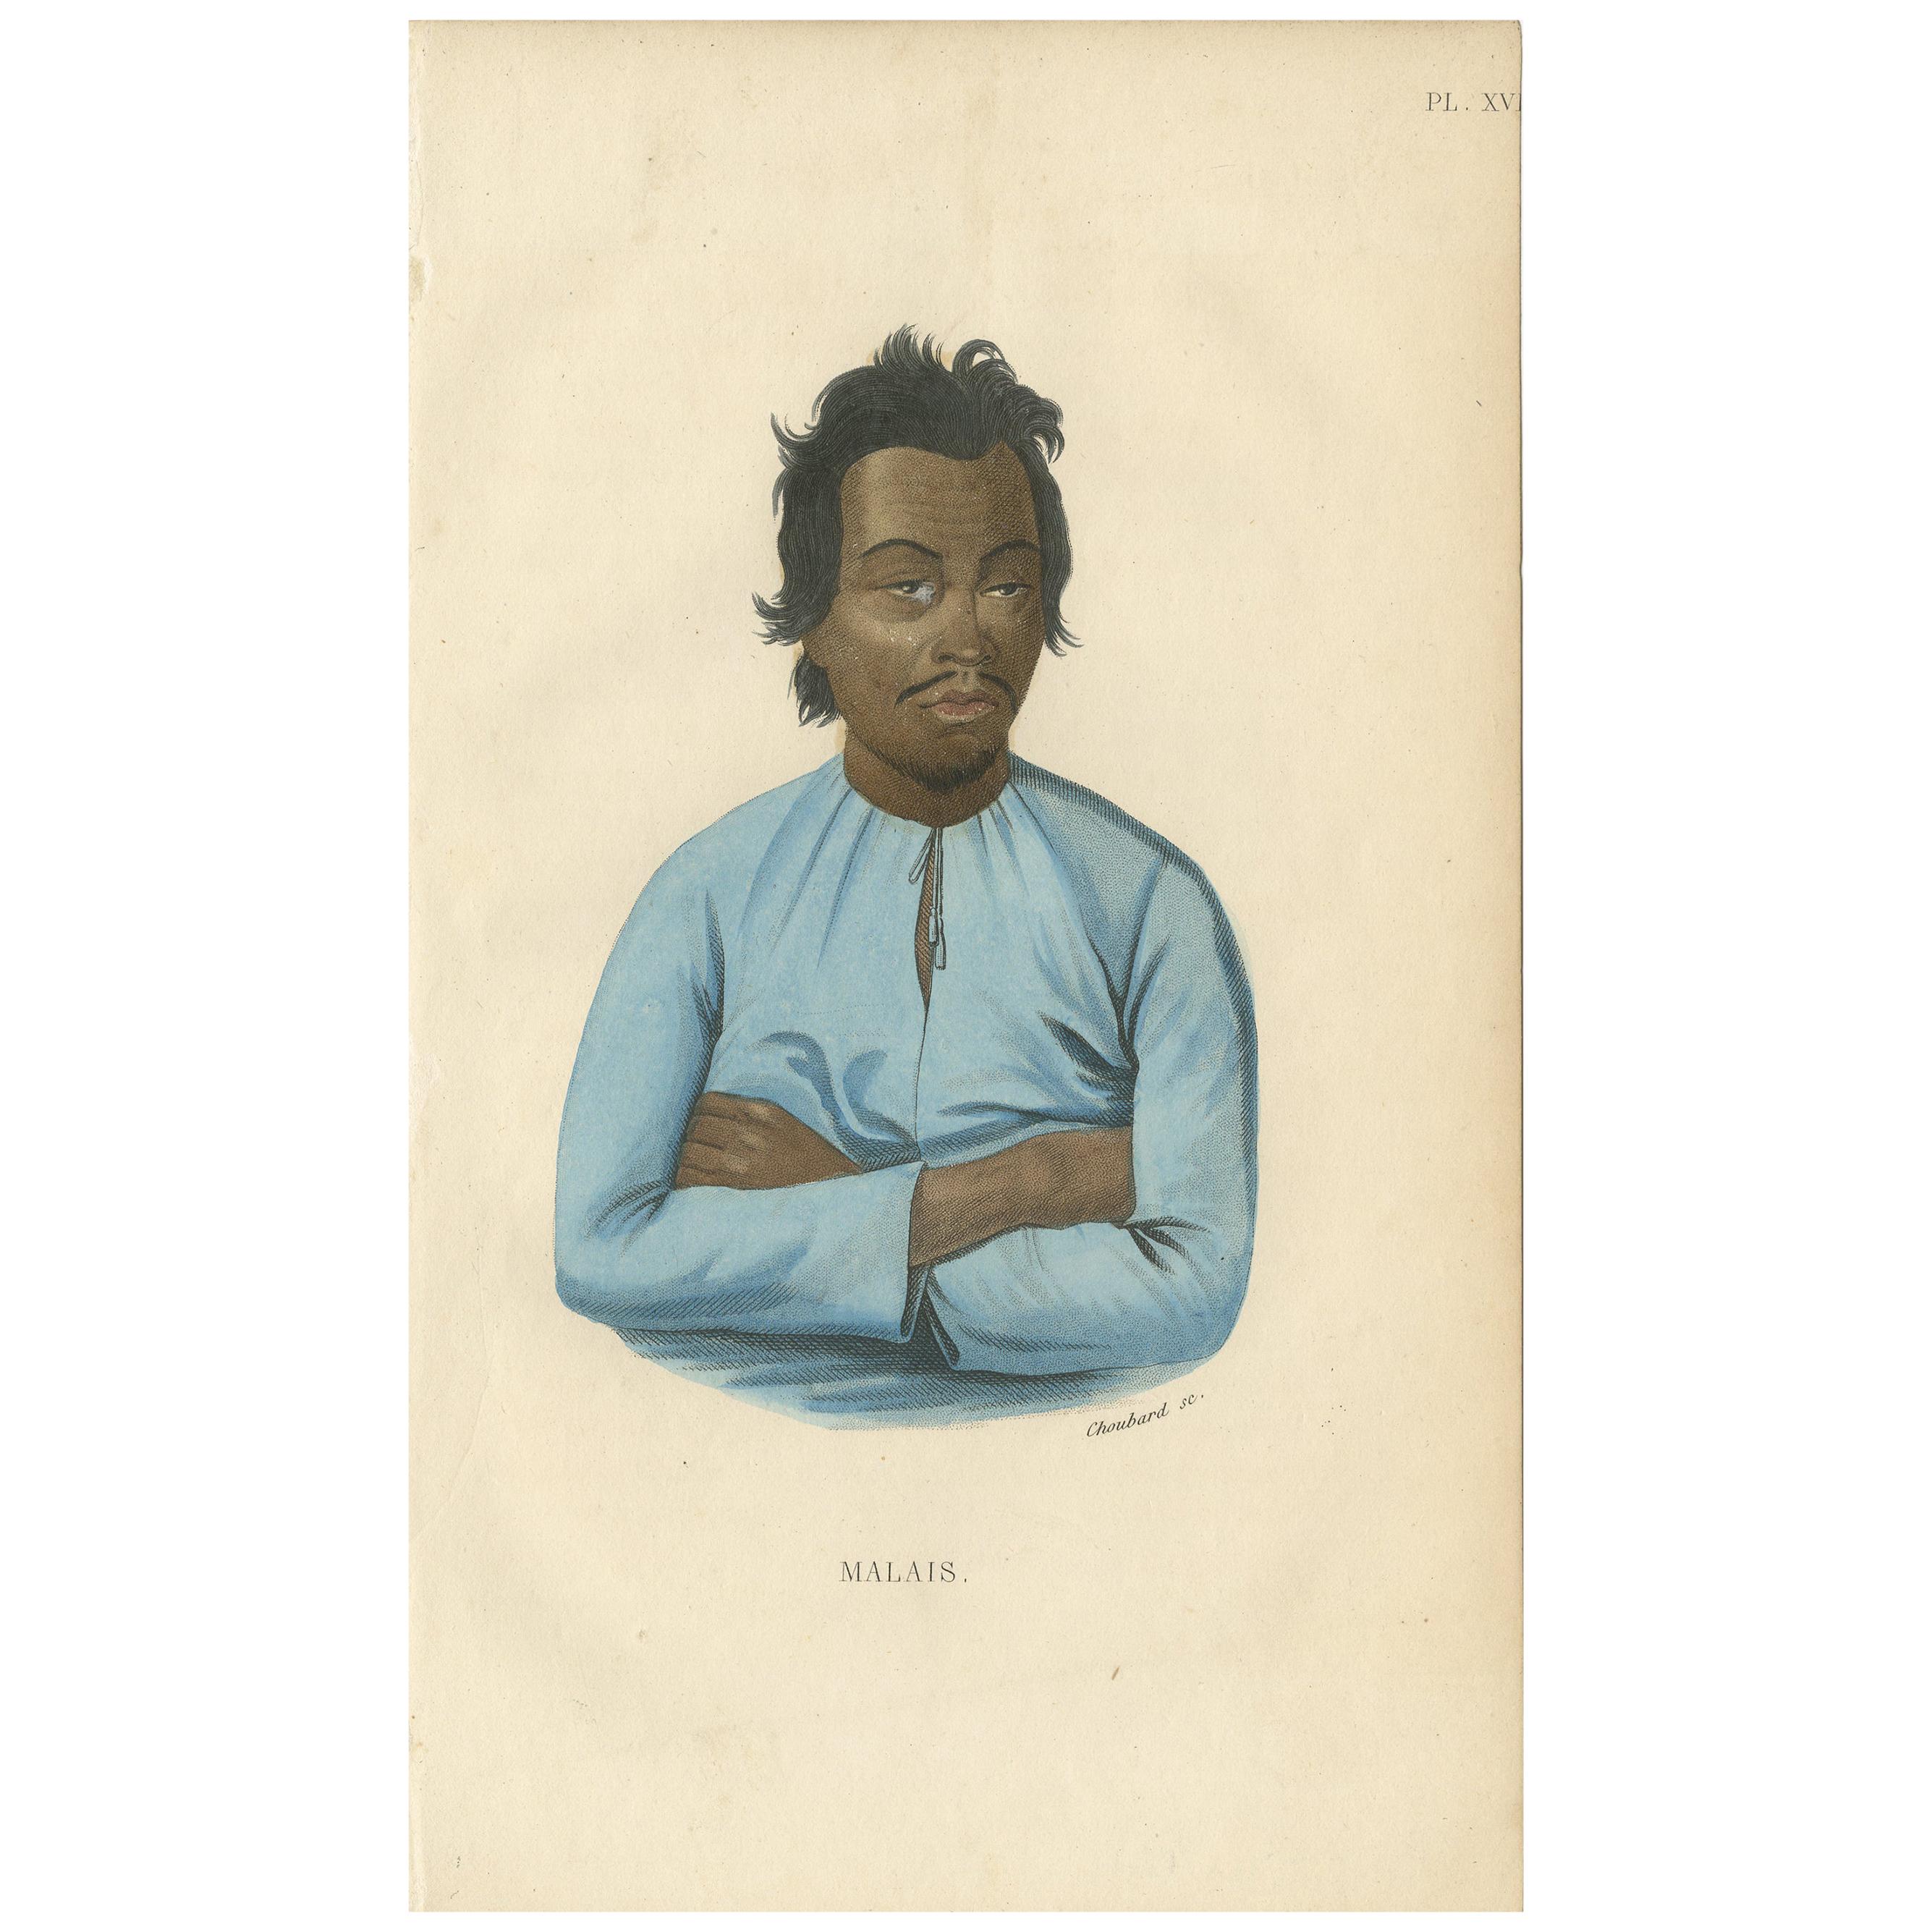 Antique Print of a Malay by Prichard, '1843'